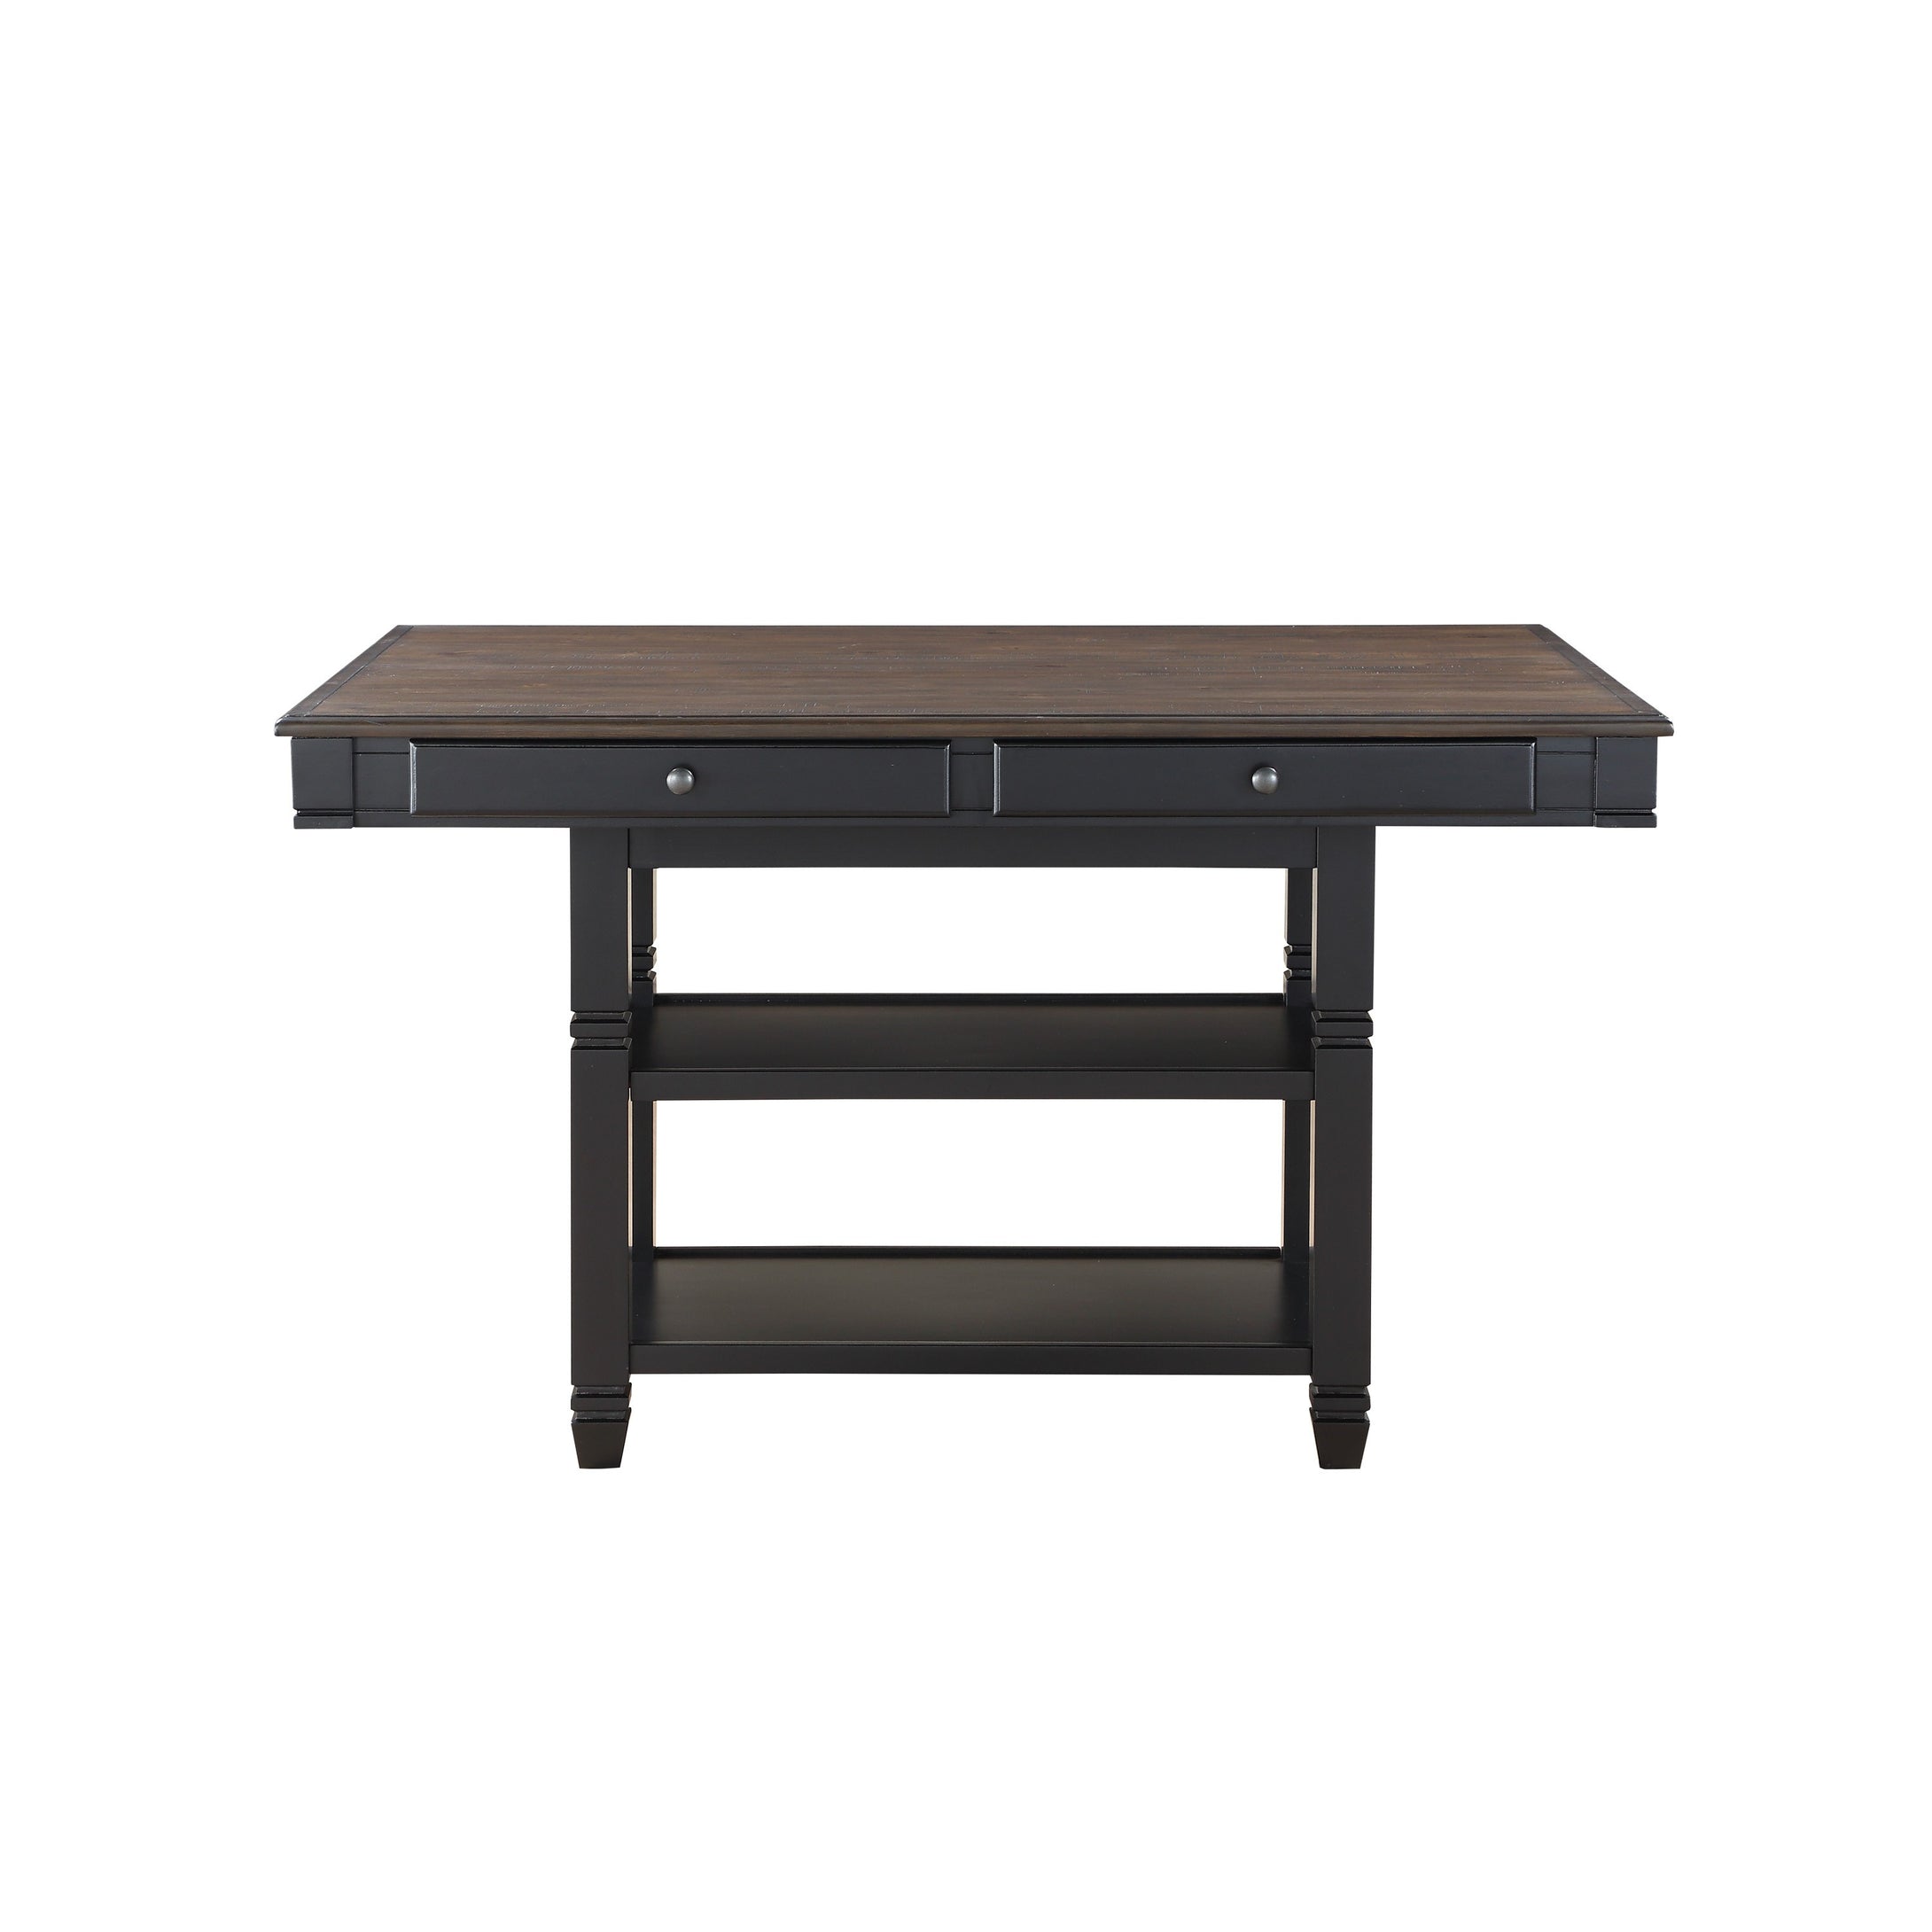 5705BK-36 Counter Height Table